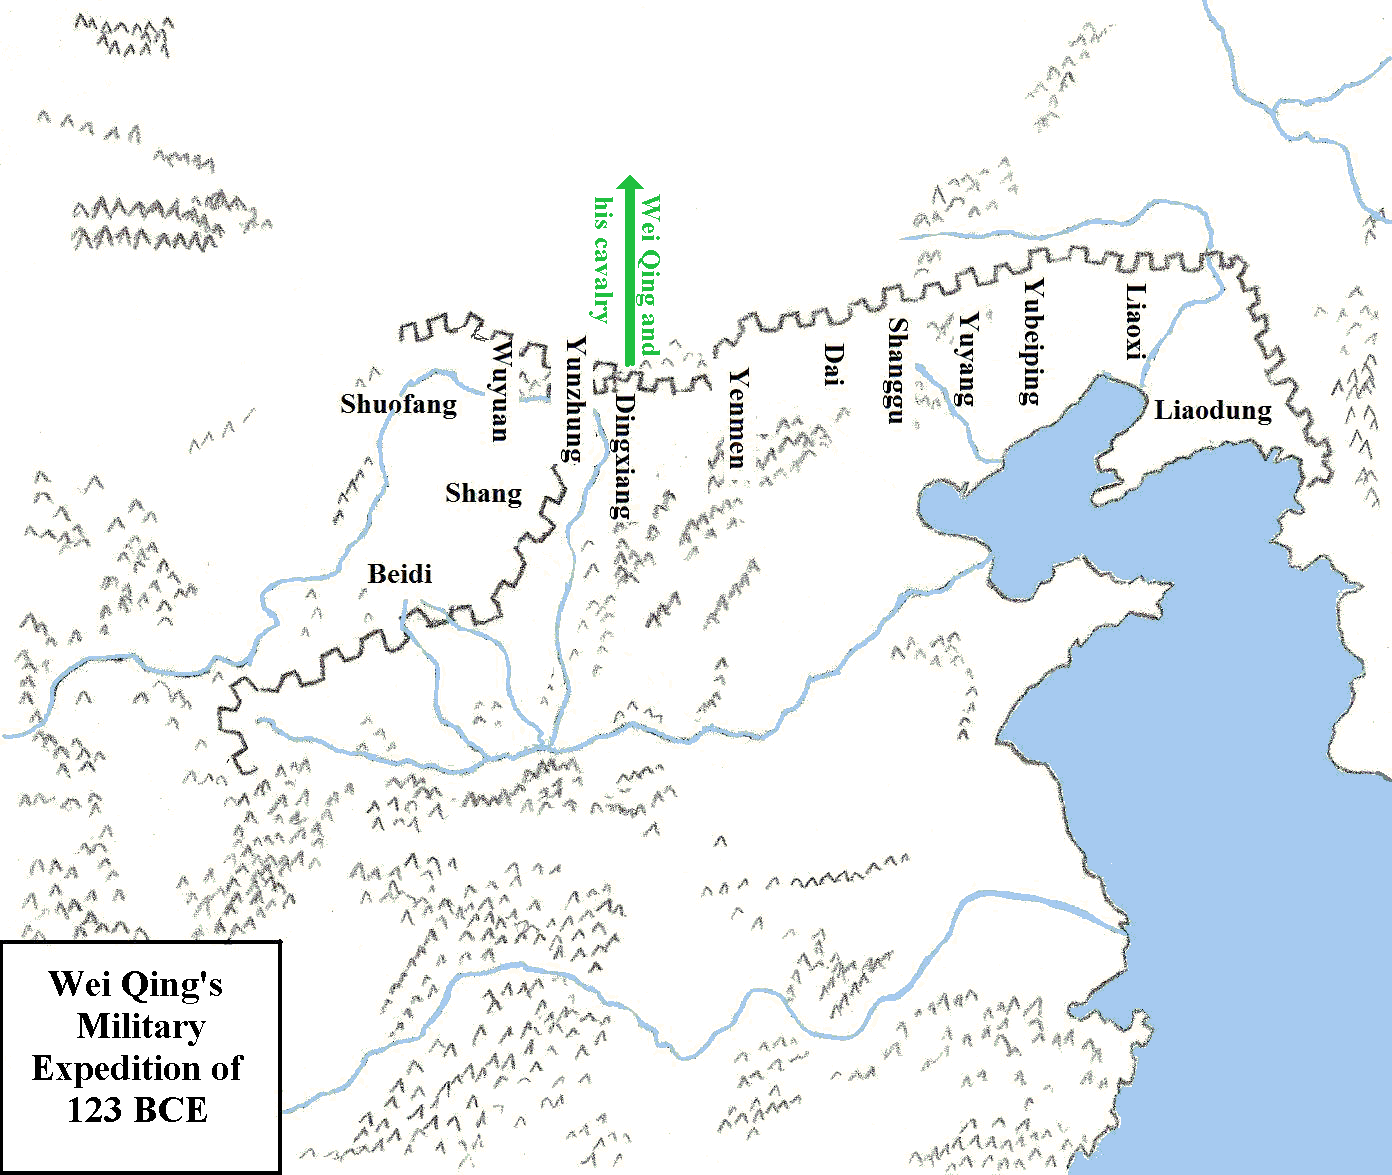 Map showing Chinese military expedition in 123 BCE